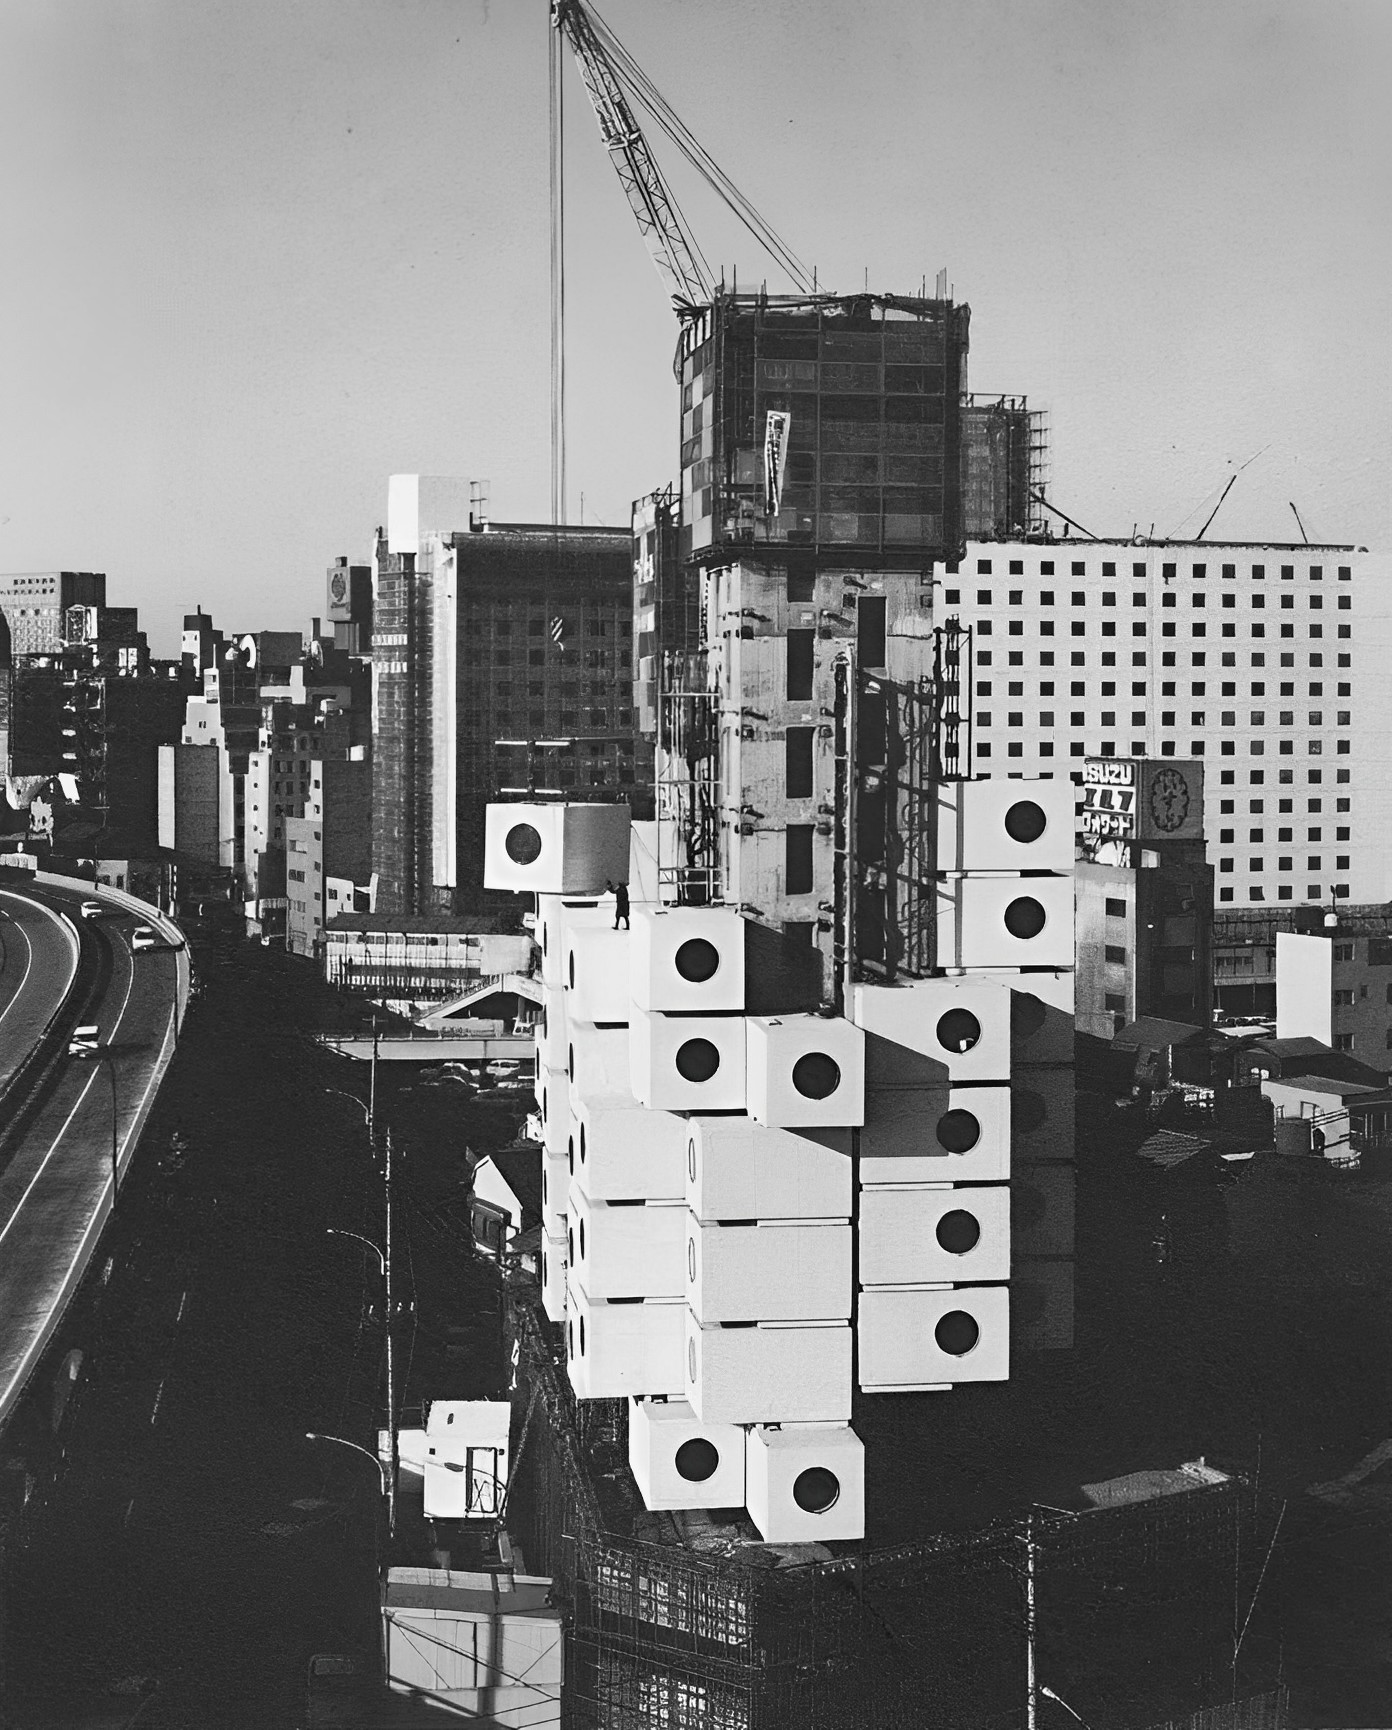 (9) Nakagin Capsule Tower, Tokyo 1972, suspends 140 rooms from two concrete cores. These steel boxes are modified shipping containers which were prefabricated in Osaka, trucked to Tokyo and lifted into place by a crane. They include every amenity which one could miniaturize and put into one room, except a stove. (The tower is in the restaurant district.)